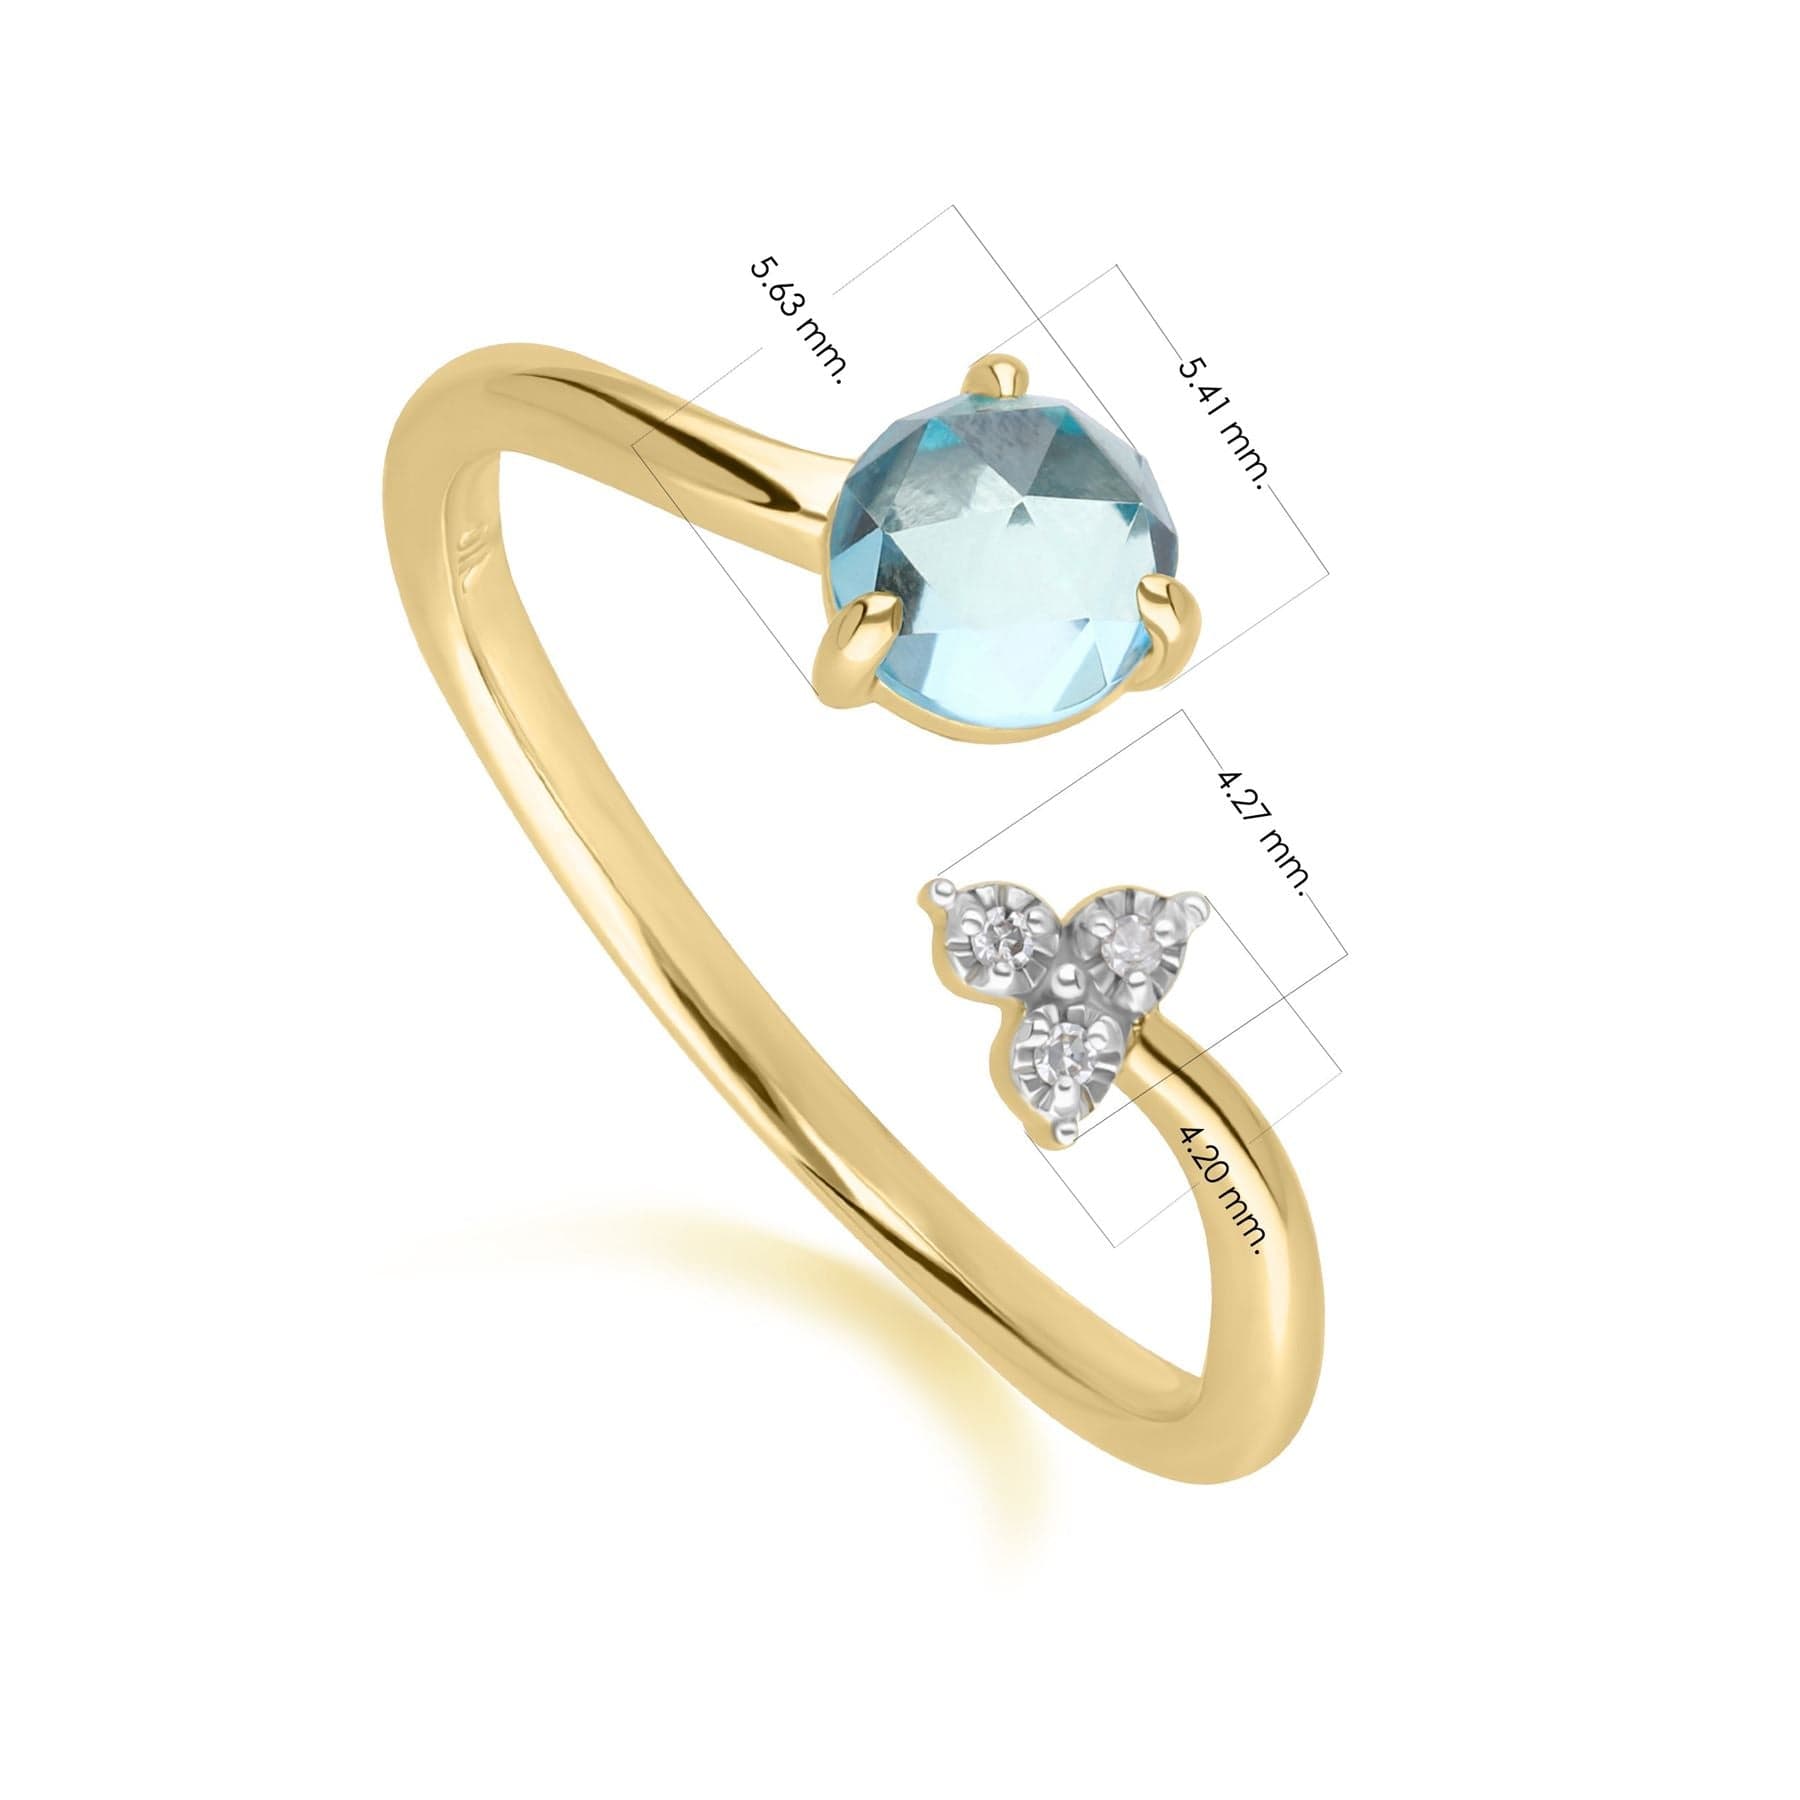 135R2057019 Classic Light Swiss Blue Topaz Open Ring in 9ct Yellow Gold Dimensions